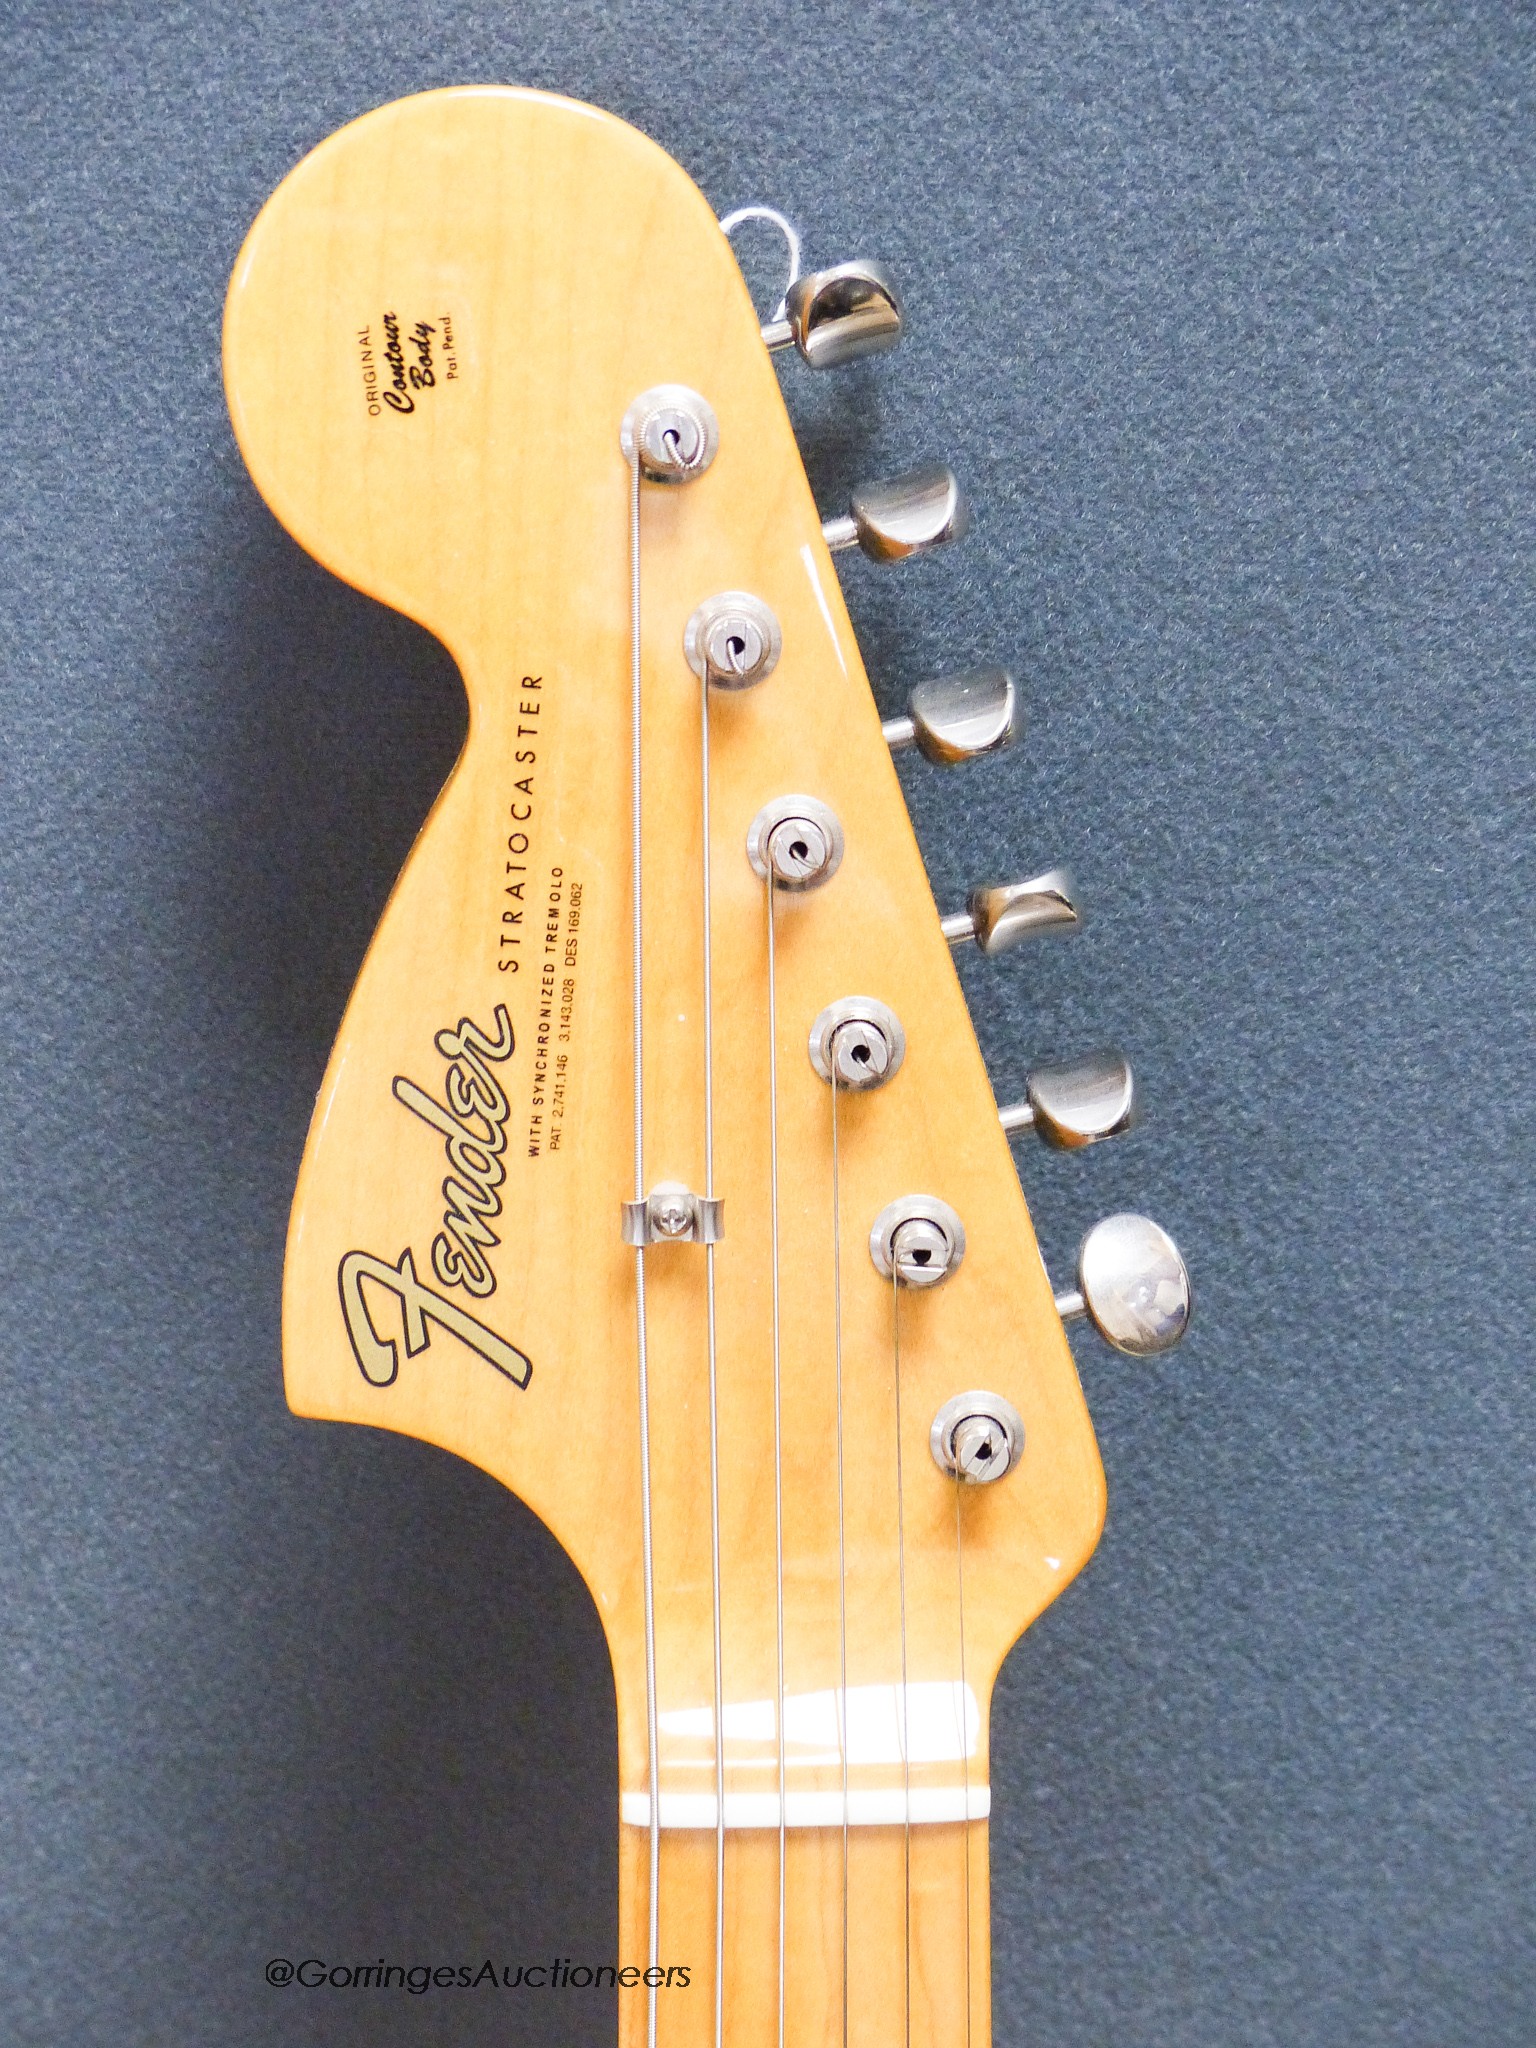 A Fender Stratocaster Jimi Hendrix Voodoo Child 30th Anniversary Custom Shop electric guitar, c.2019, Olympic white with G & G custom shop hard case and stand